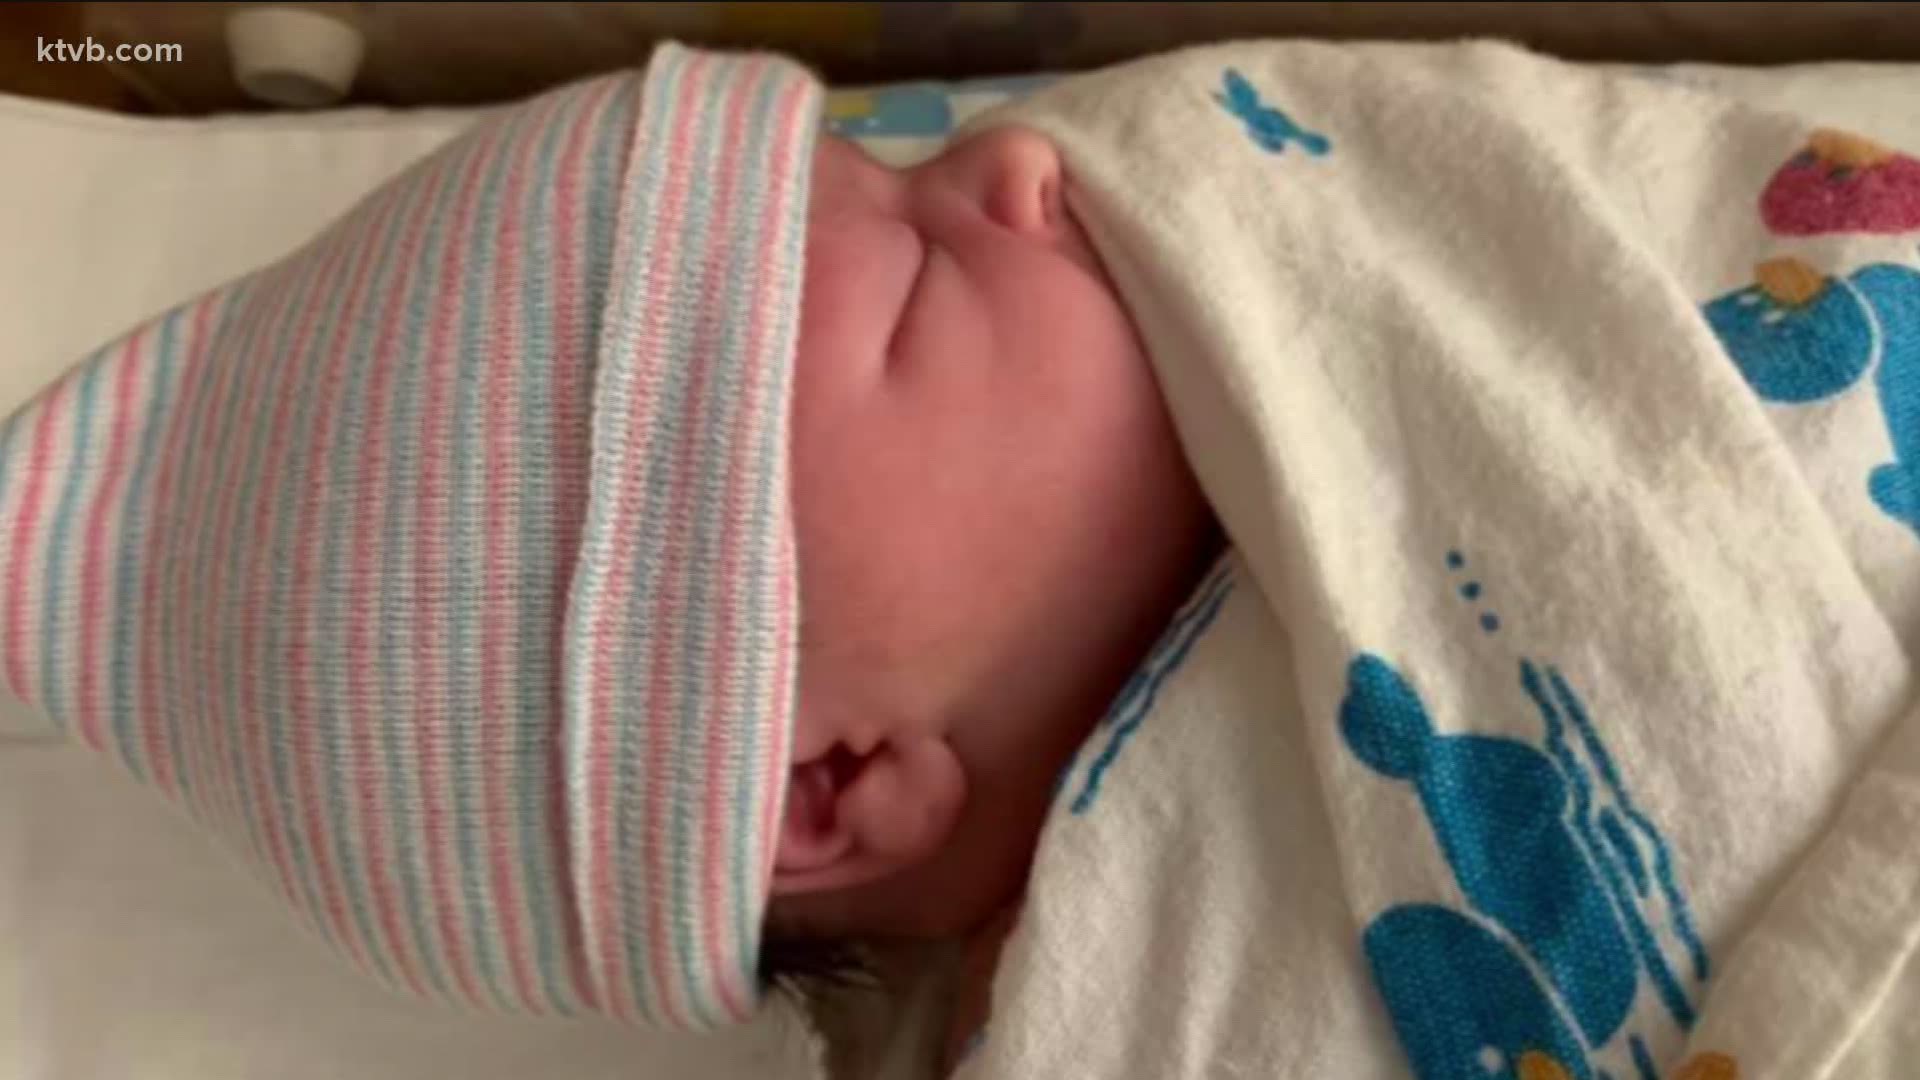 The newest addition to the KTVB family arrived on Monday.